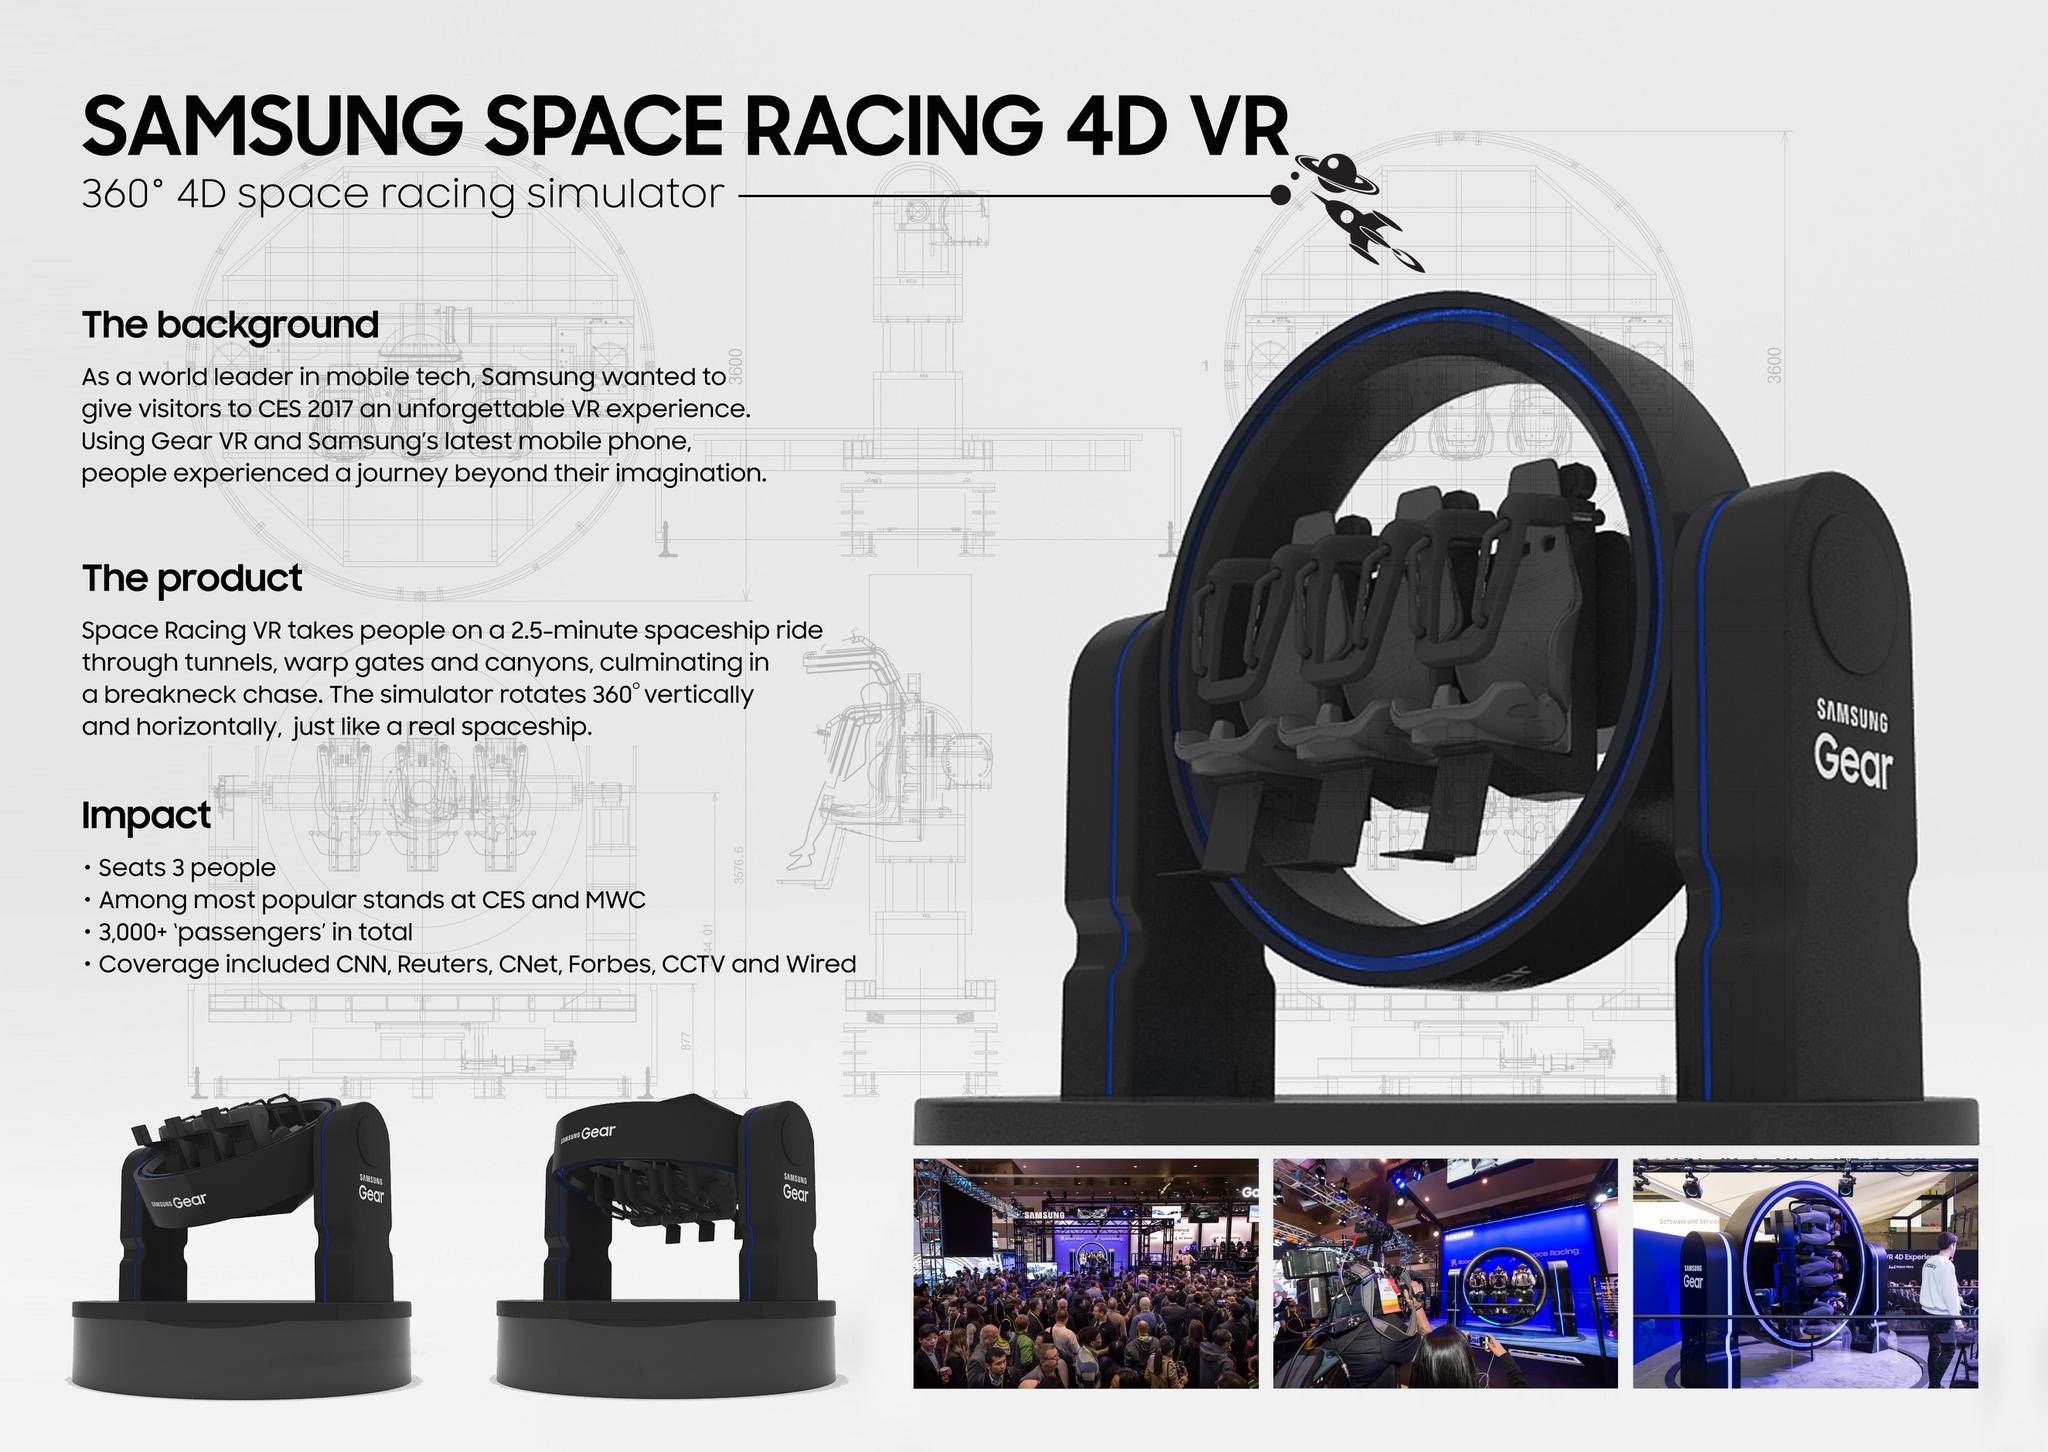 SAMSUNG SPACE RACING 4D VR